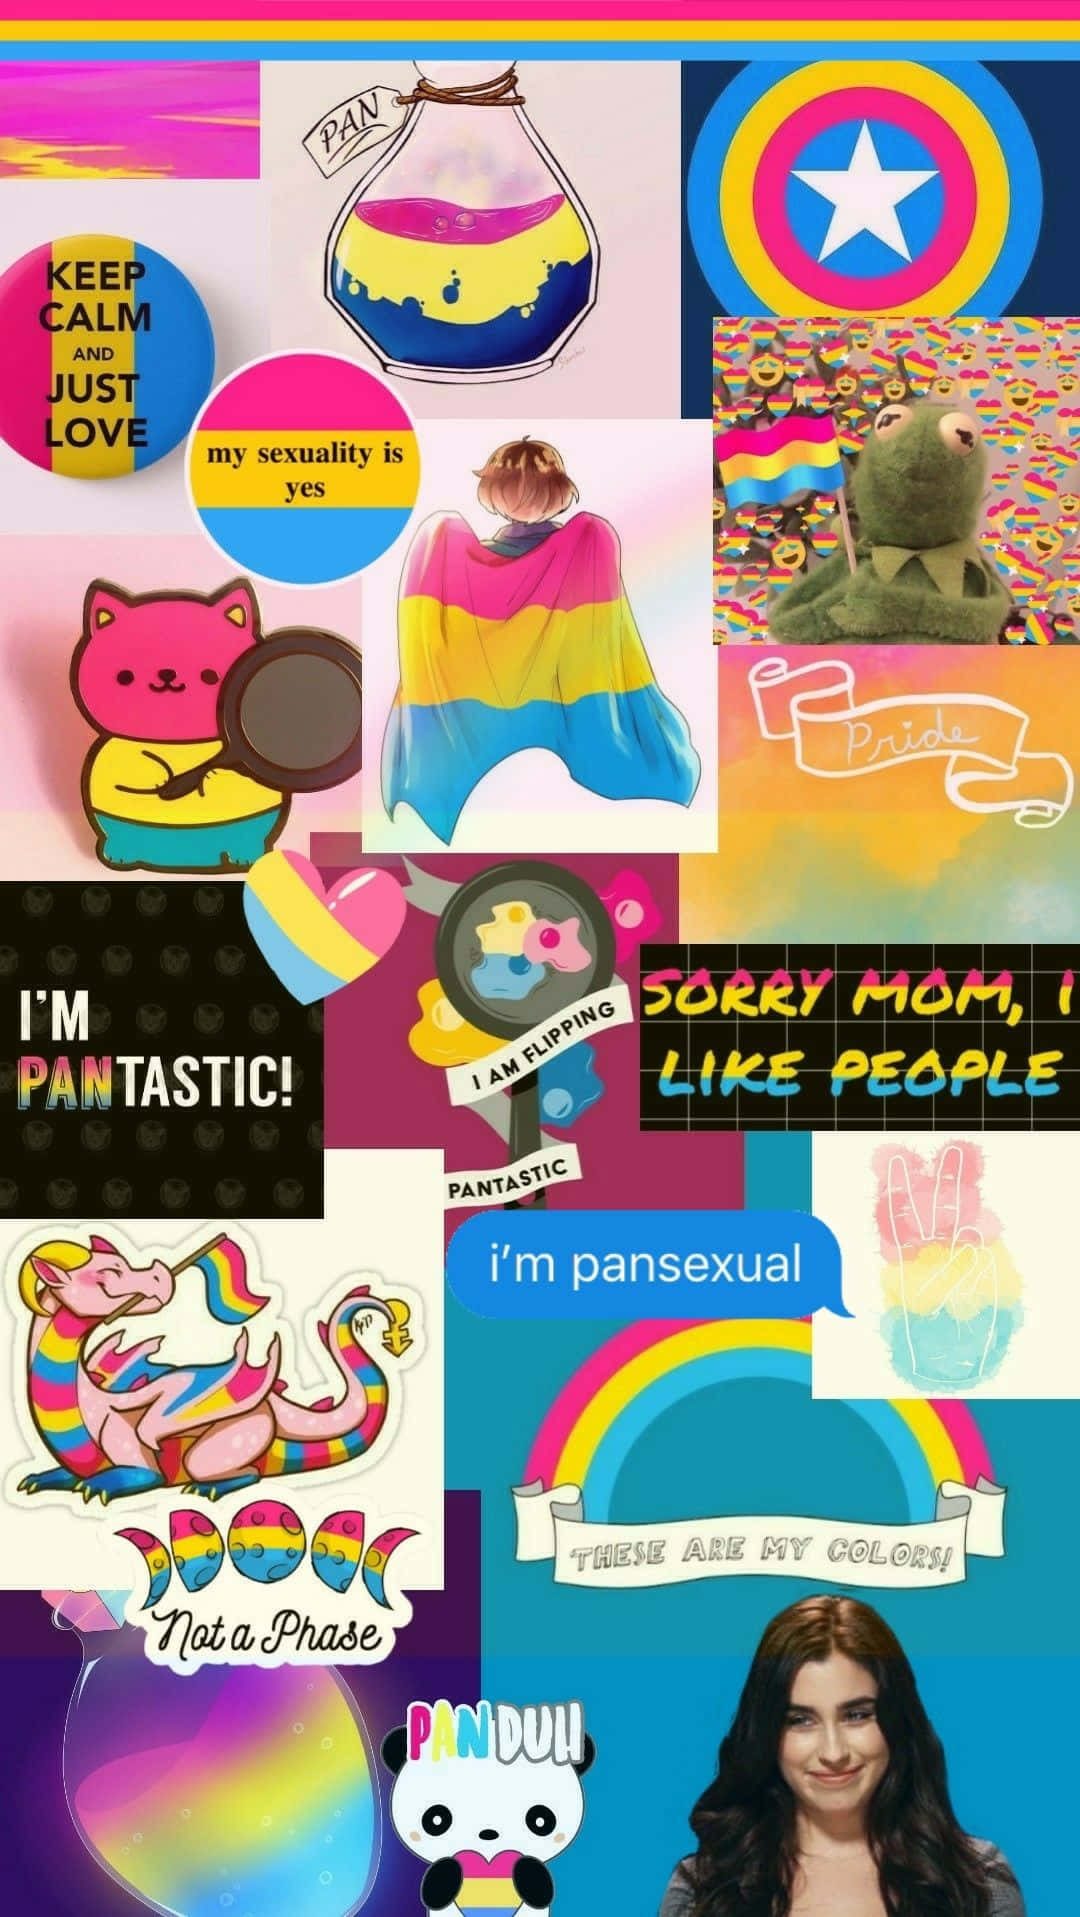 Proud to be Pansexual